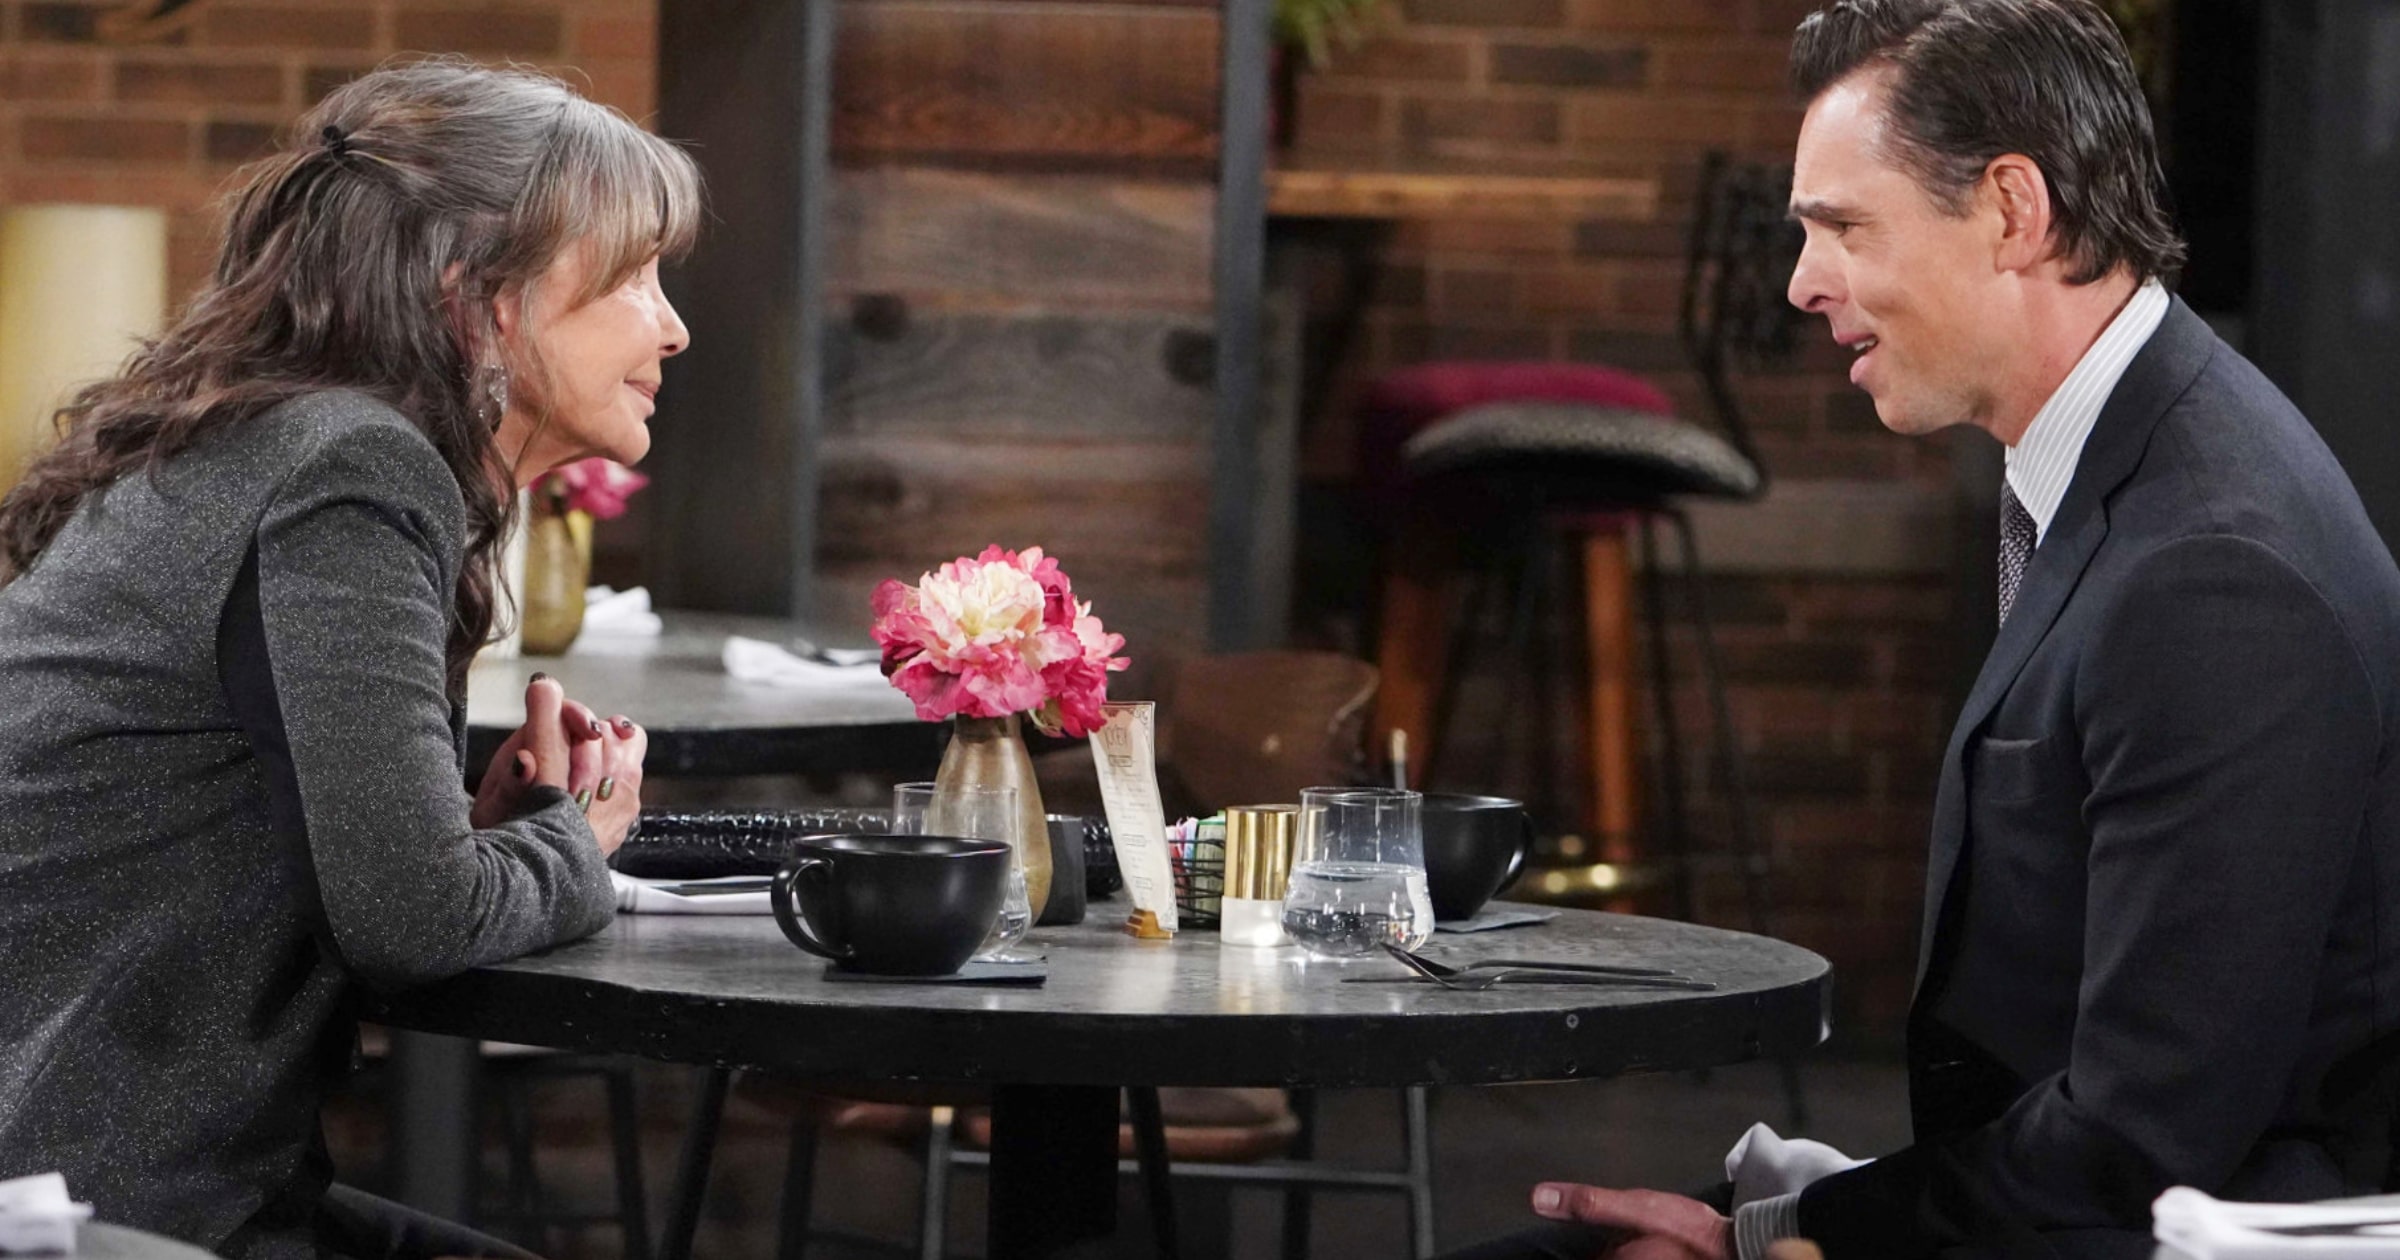 The Young and the Restless - Dec 4 - Jill and Billy